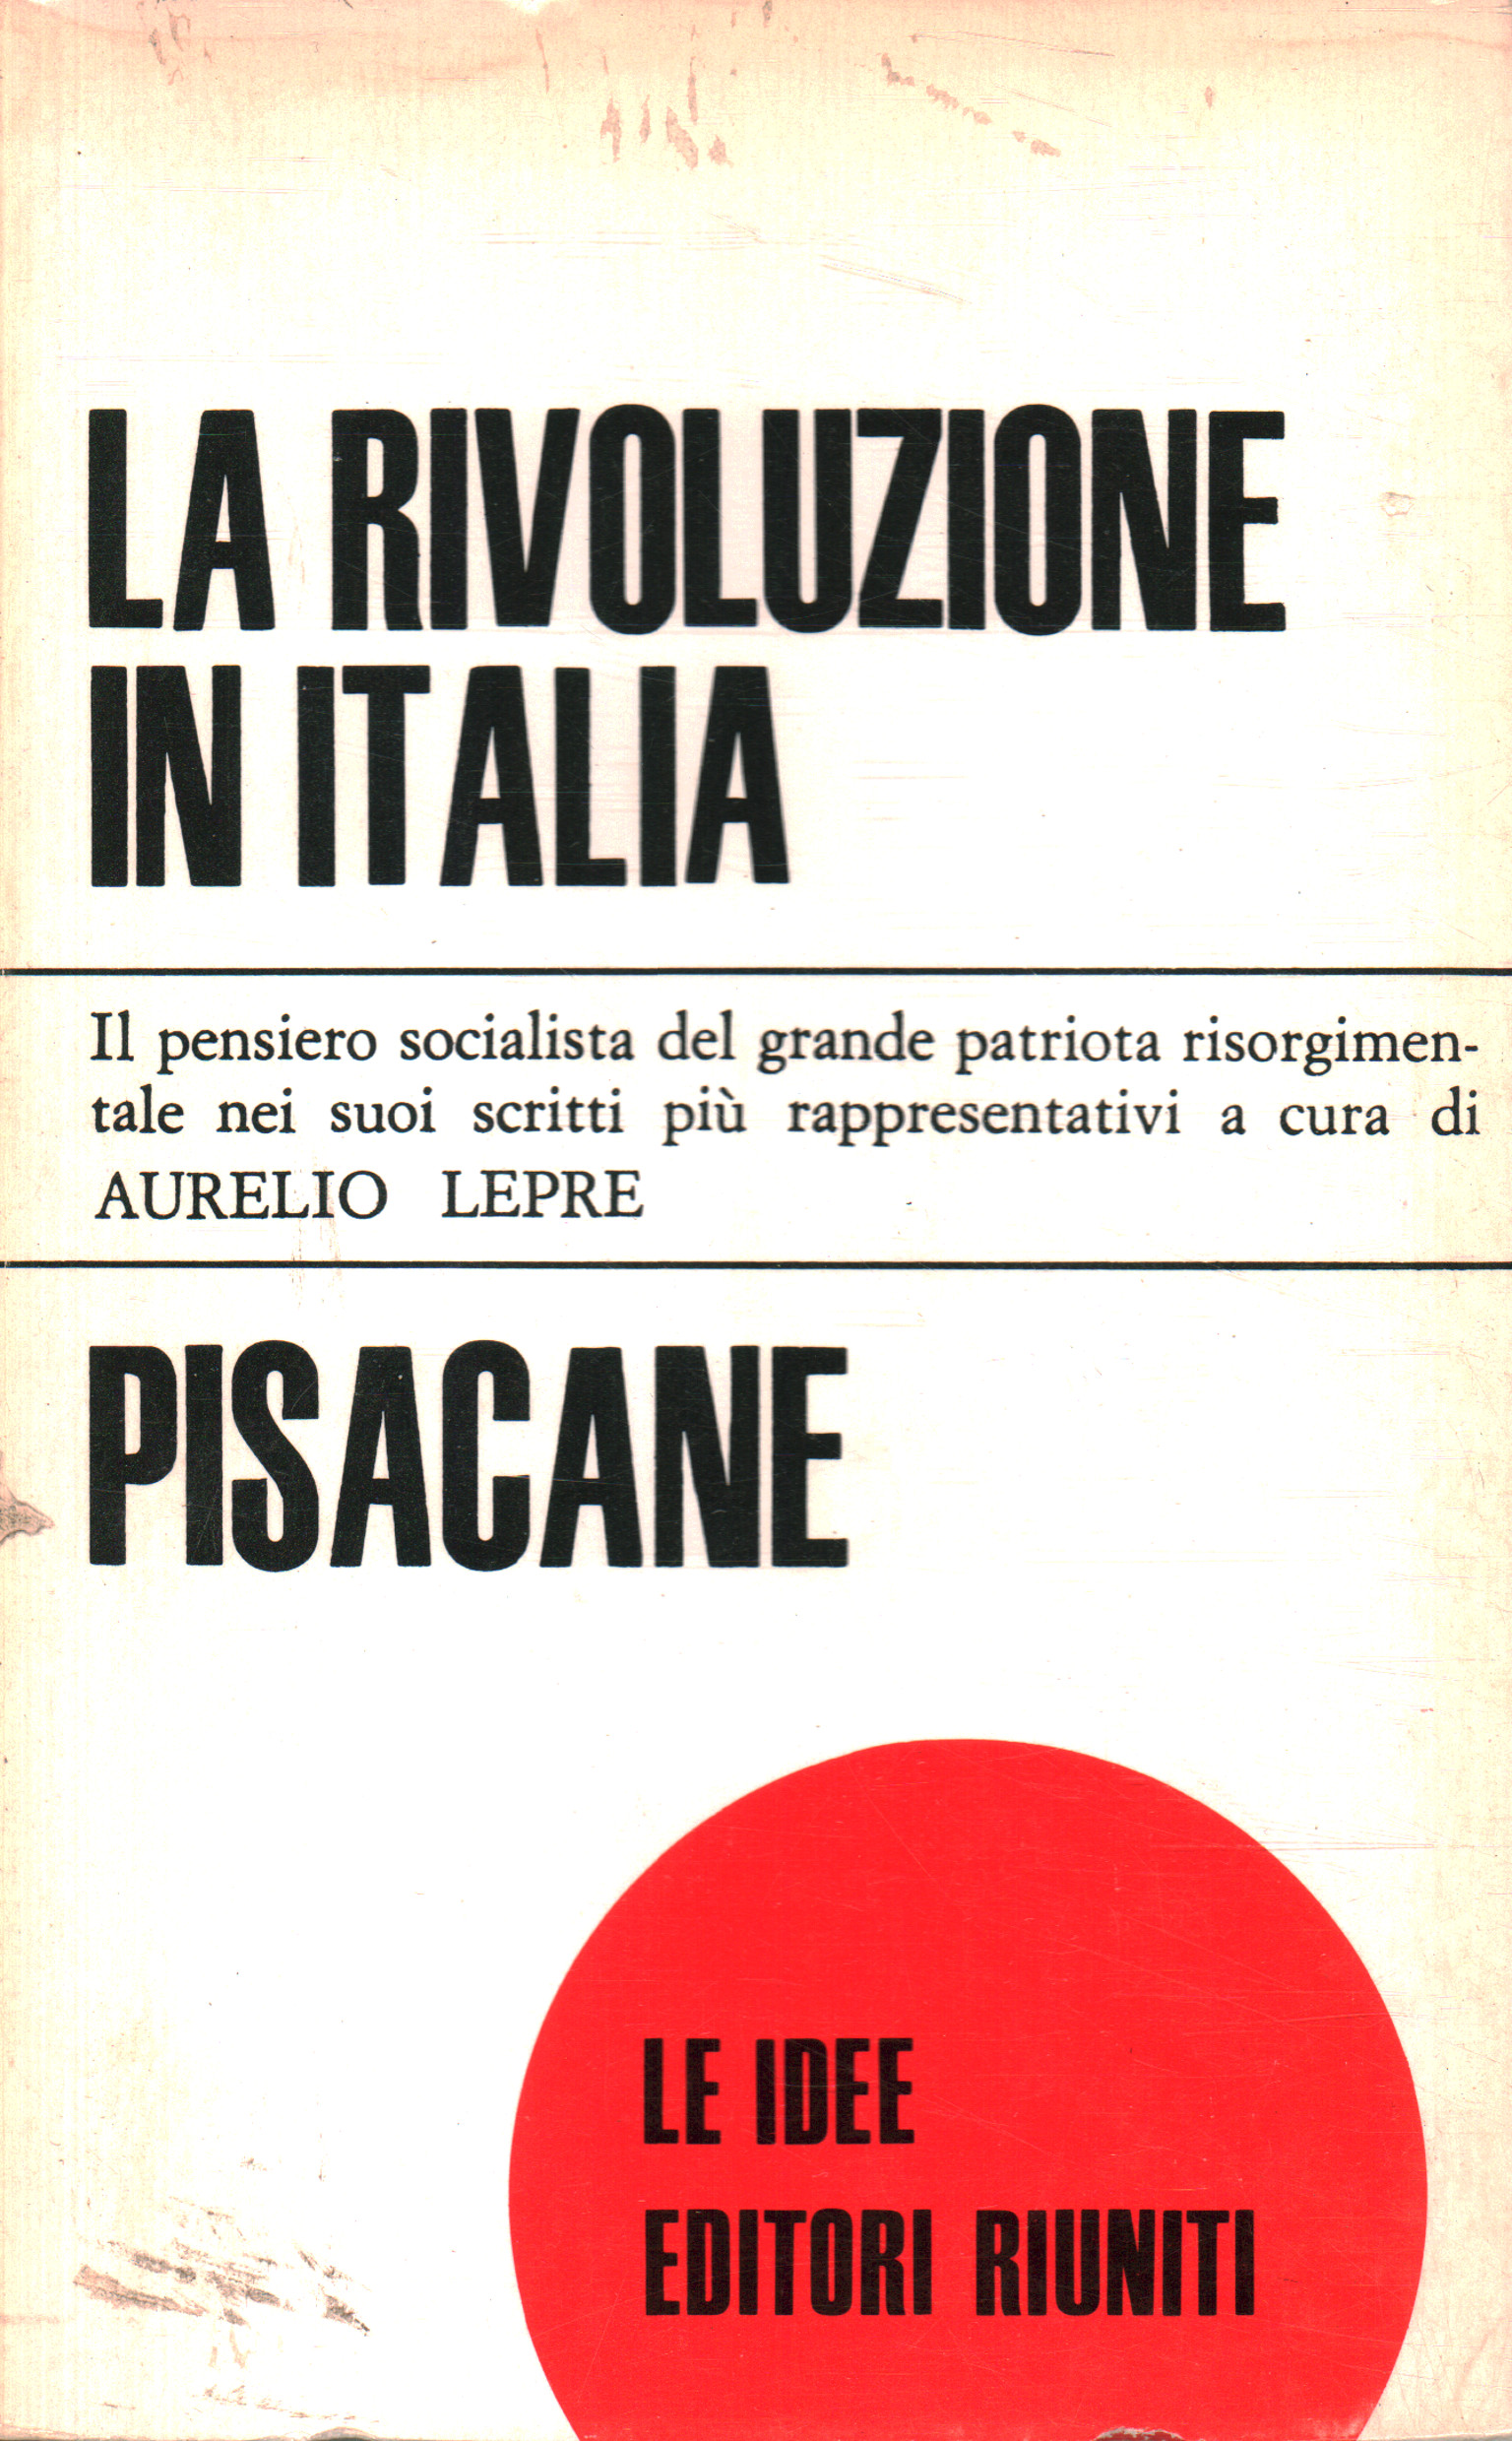 The revolution in Italy